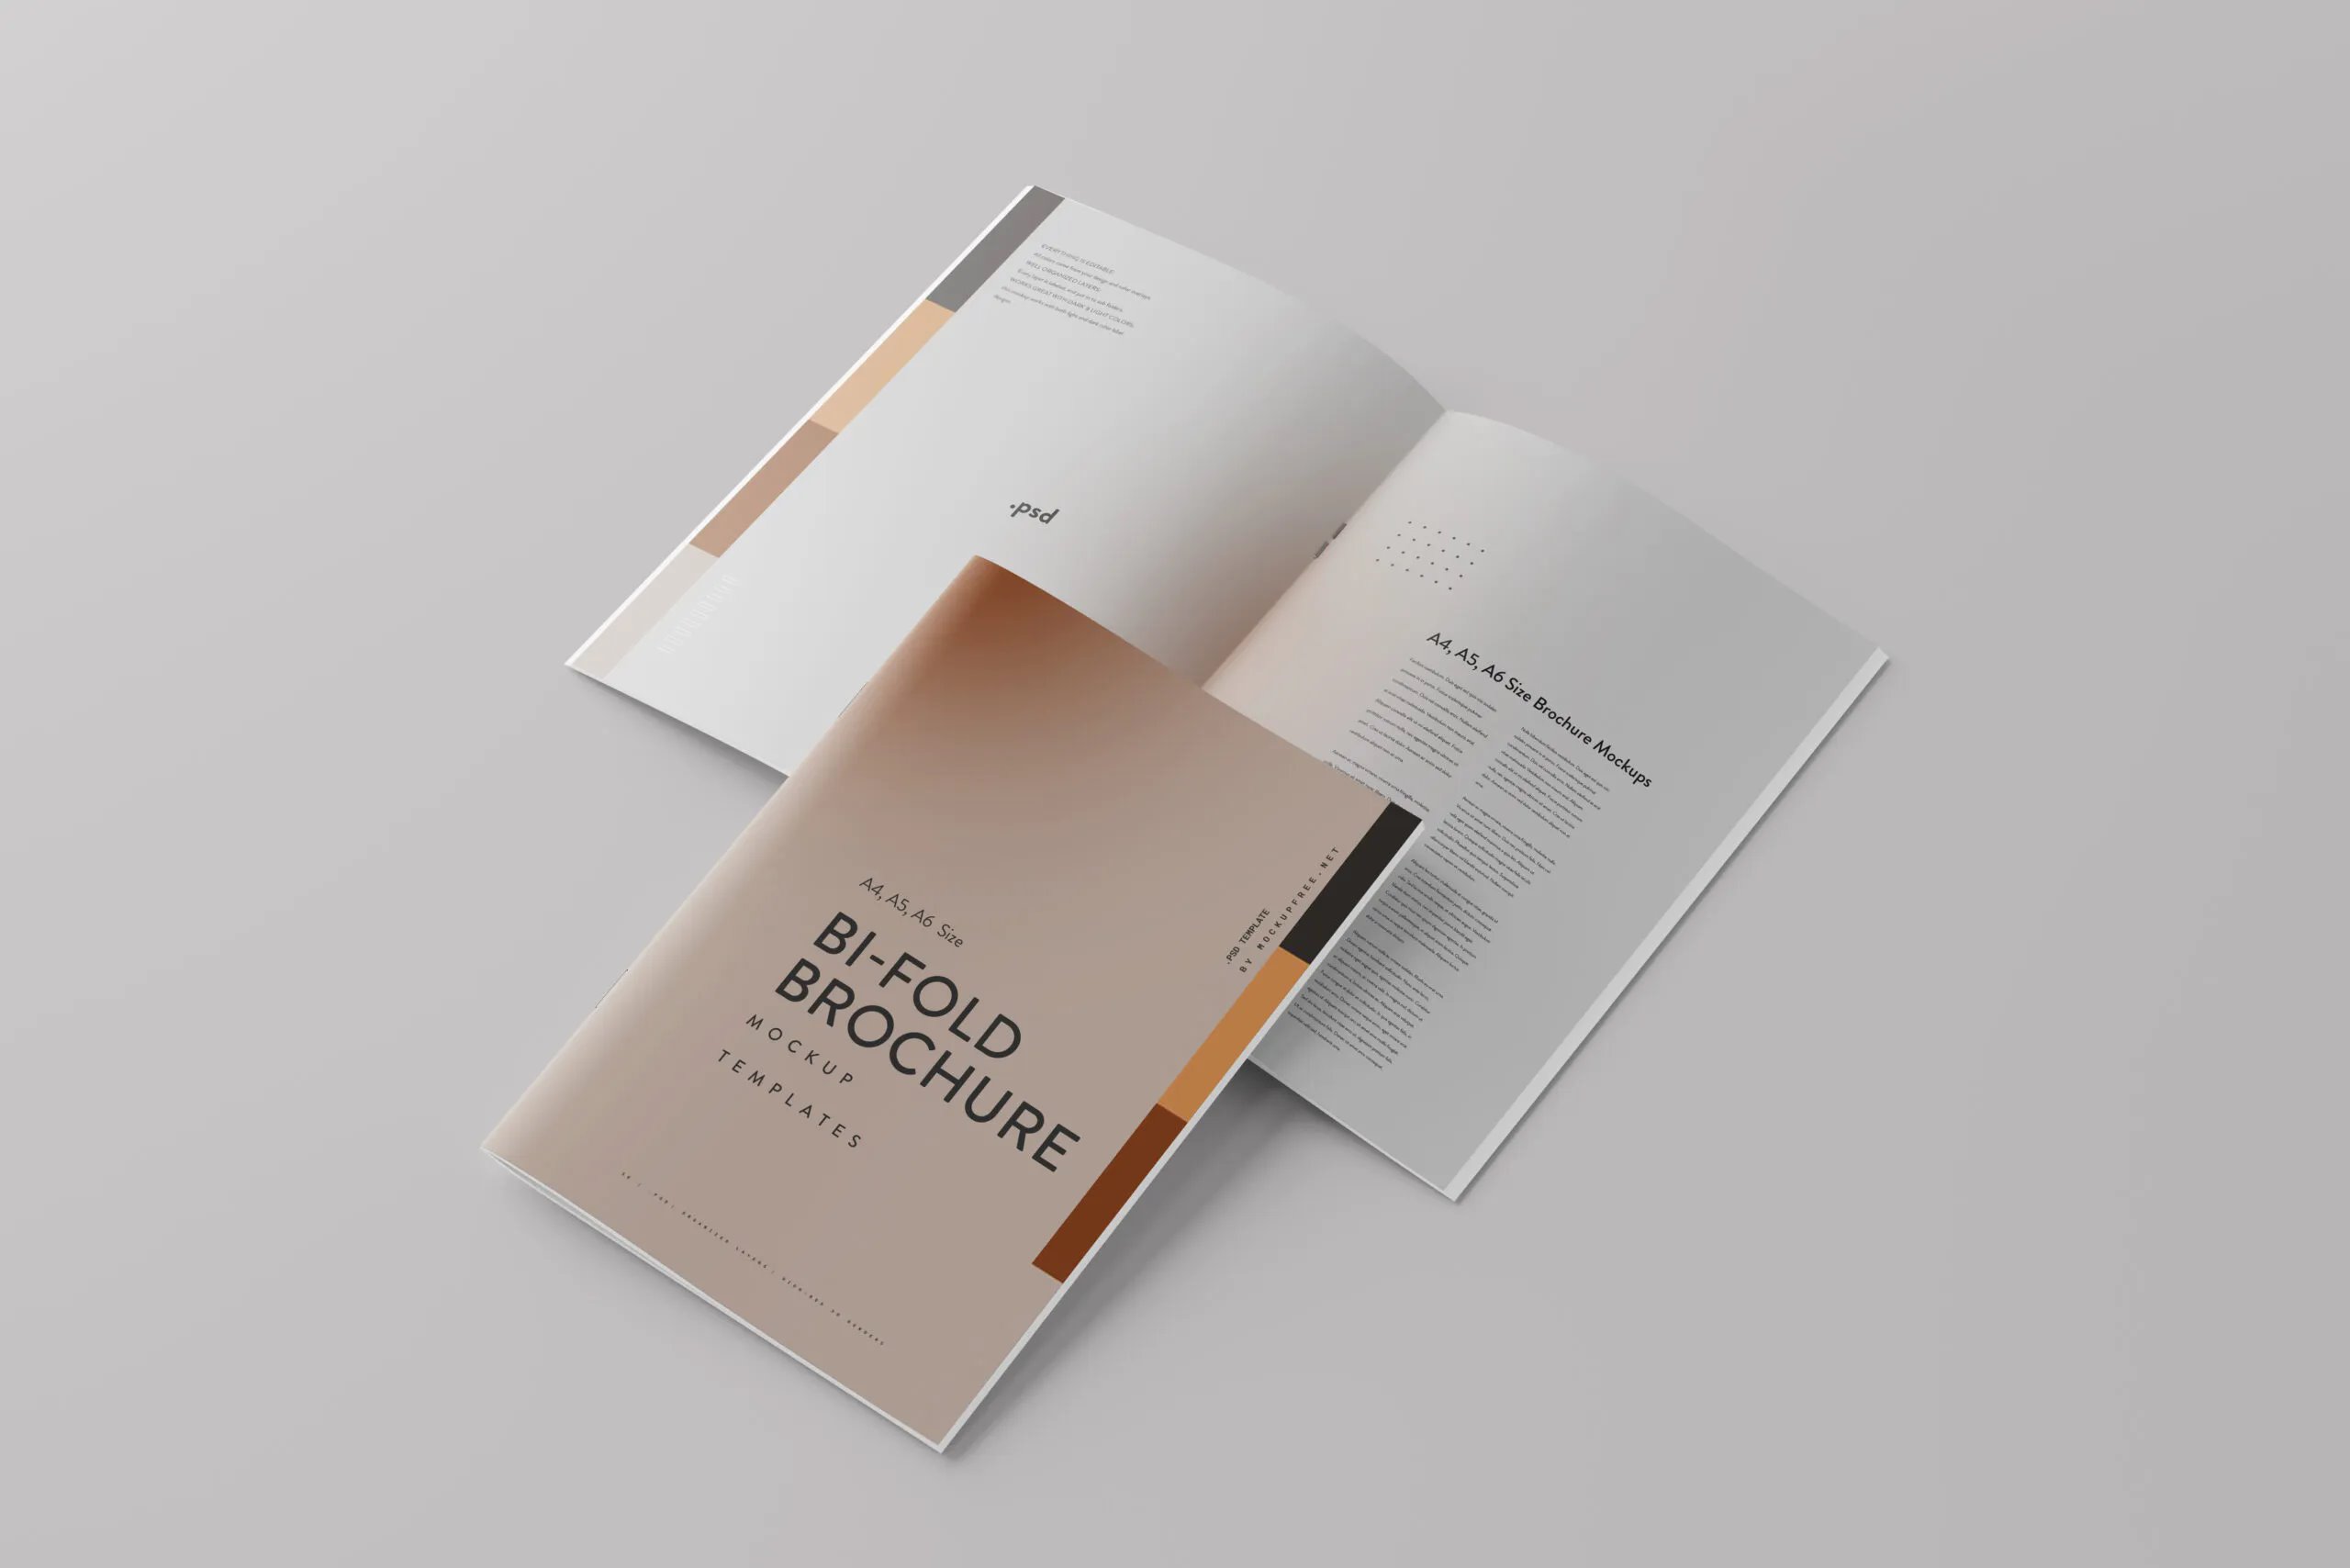 5 Bi Fold Multiple Pages Brochures Mockups in Perspective View FREE PSD